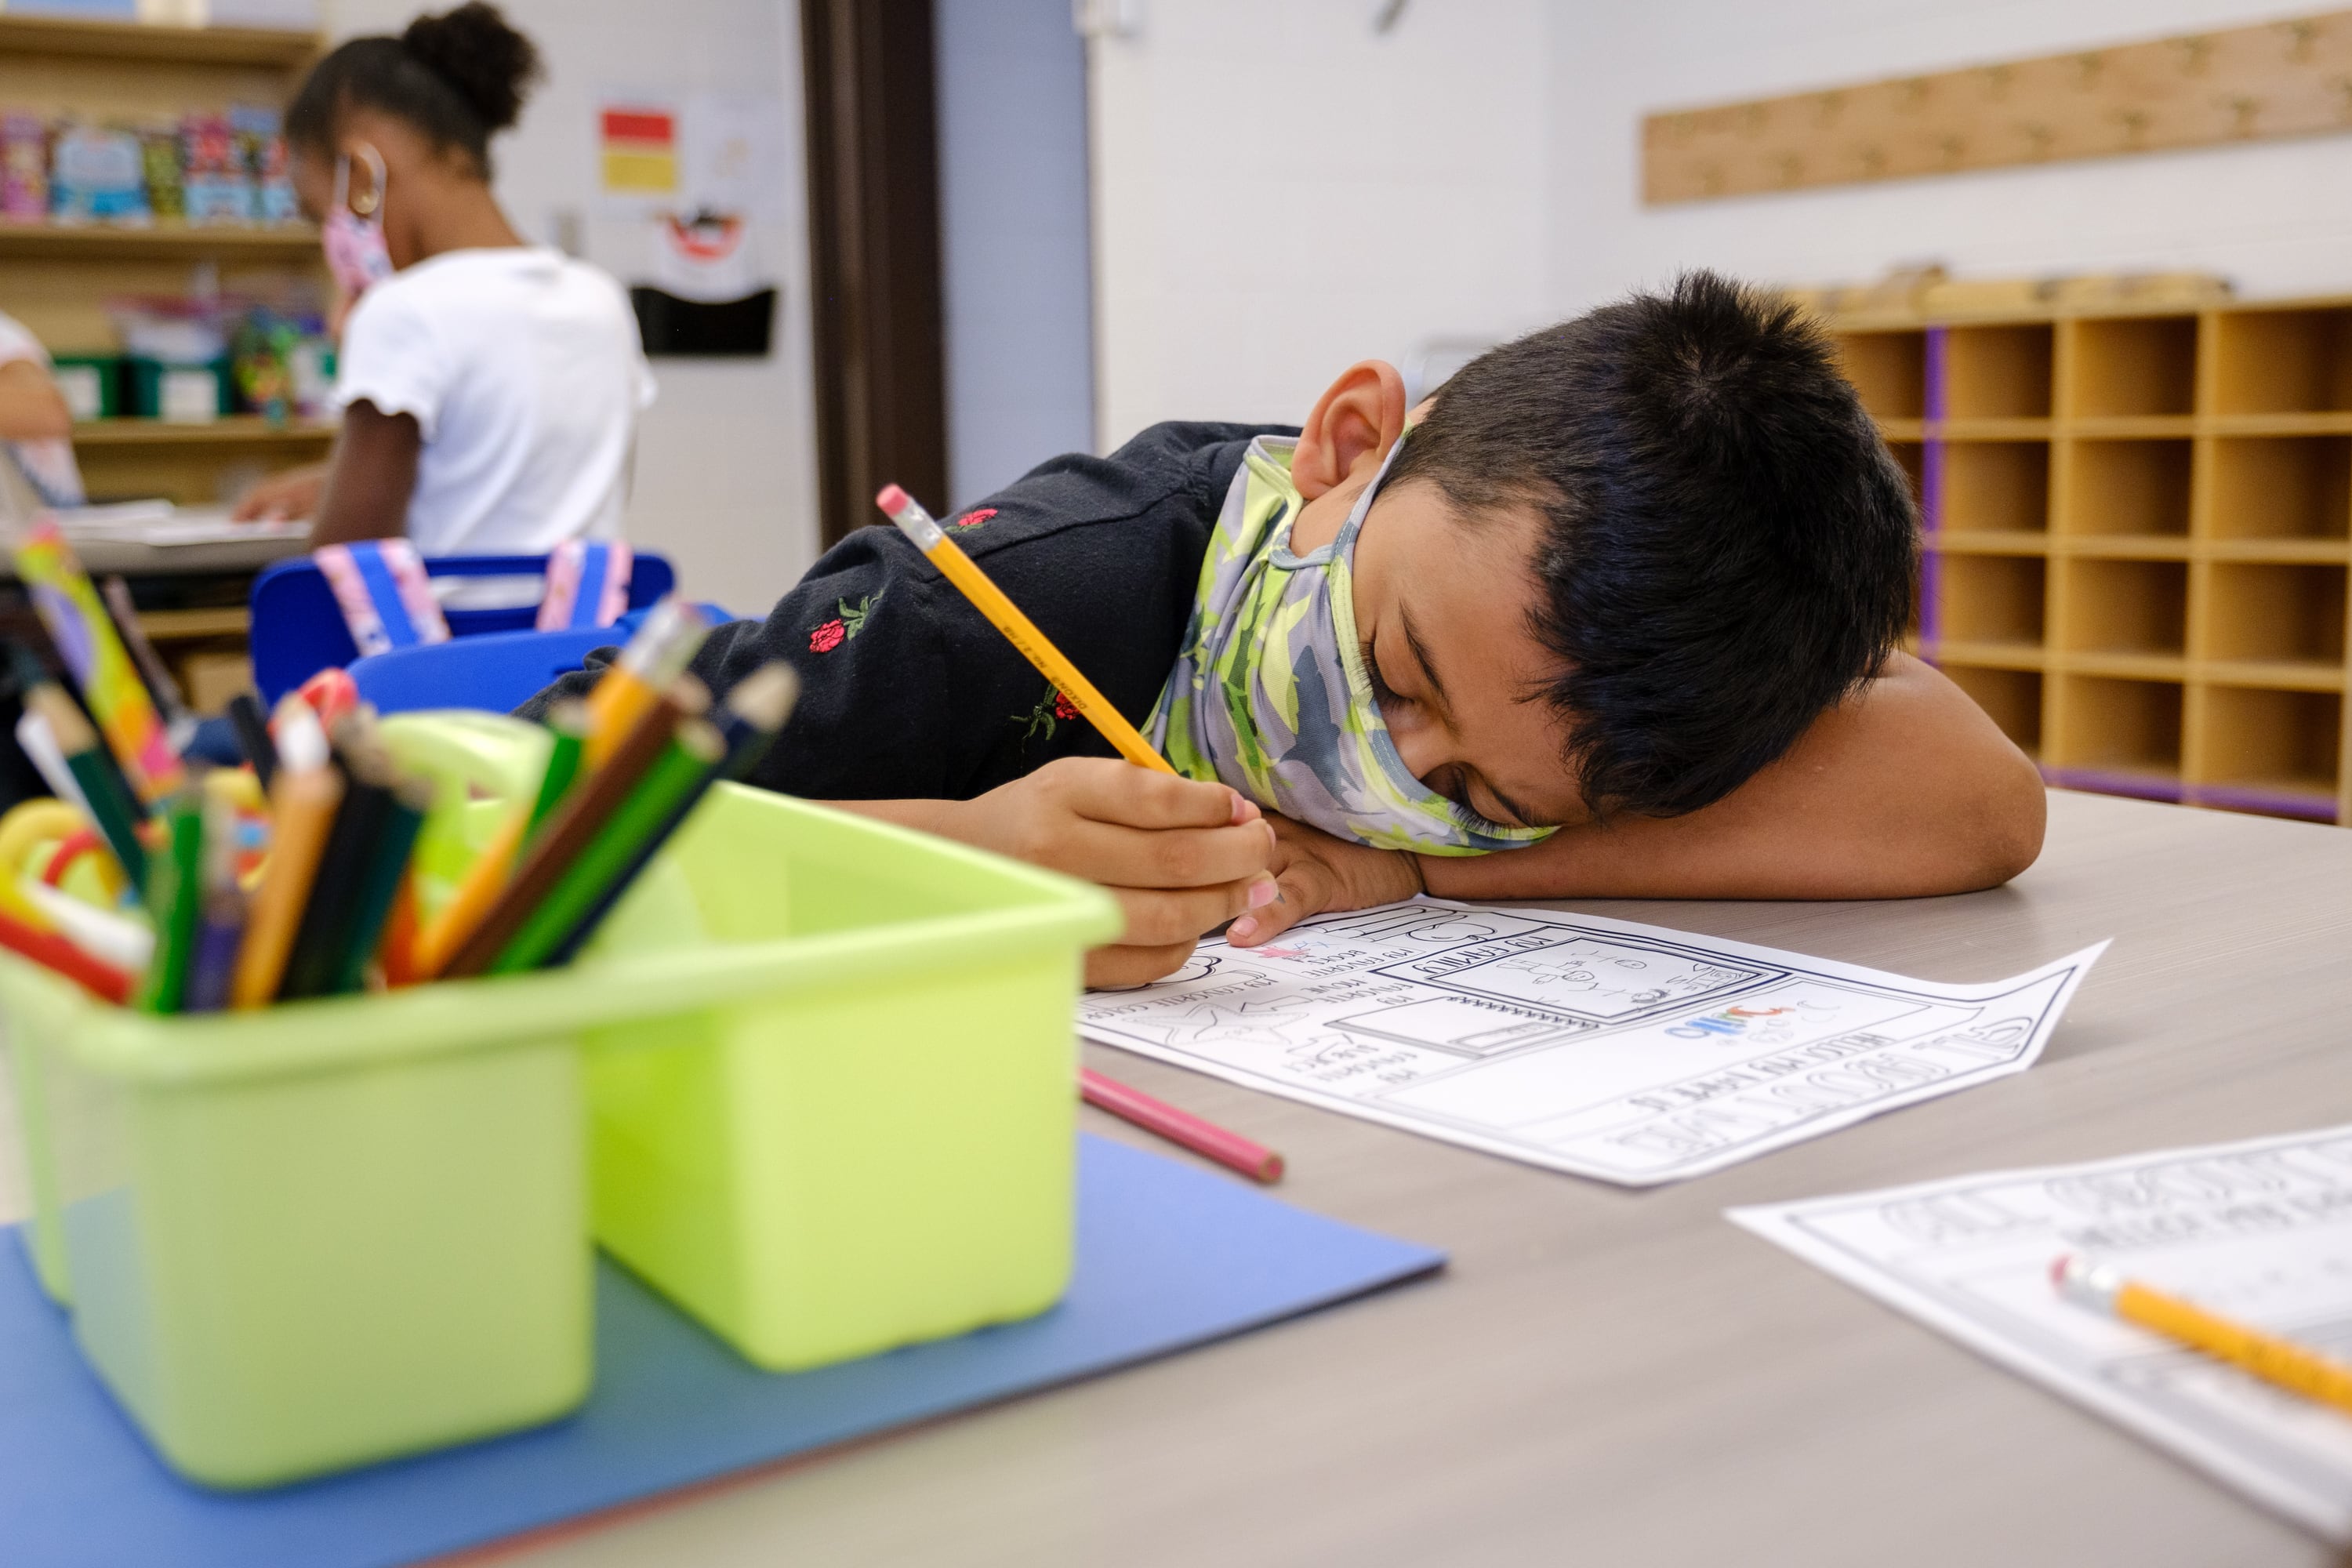 A young boy wearing a mask rests his head on a desk as he completes a worksheet.